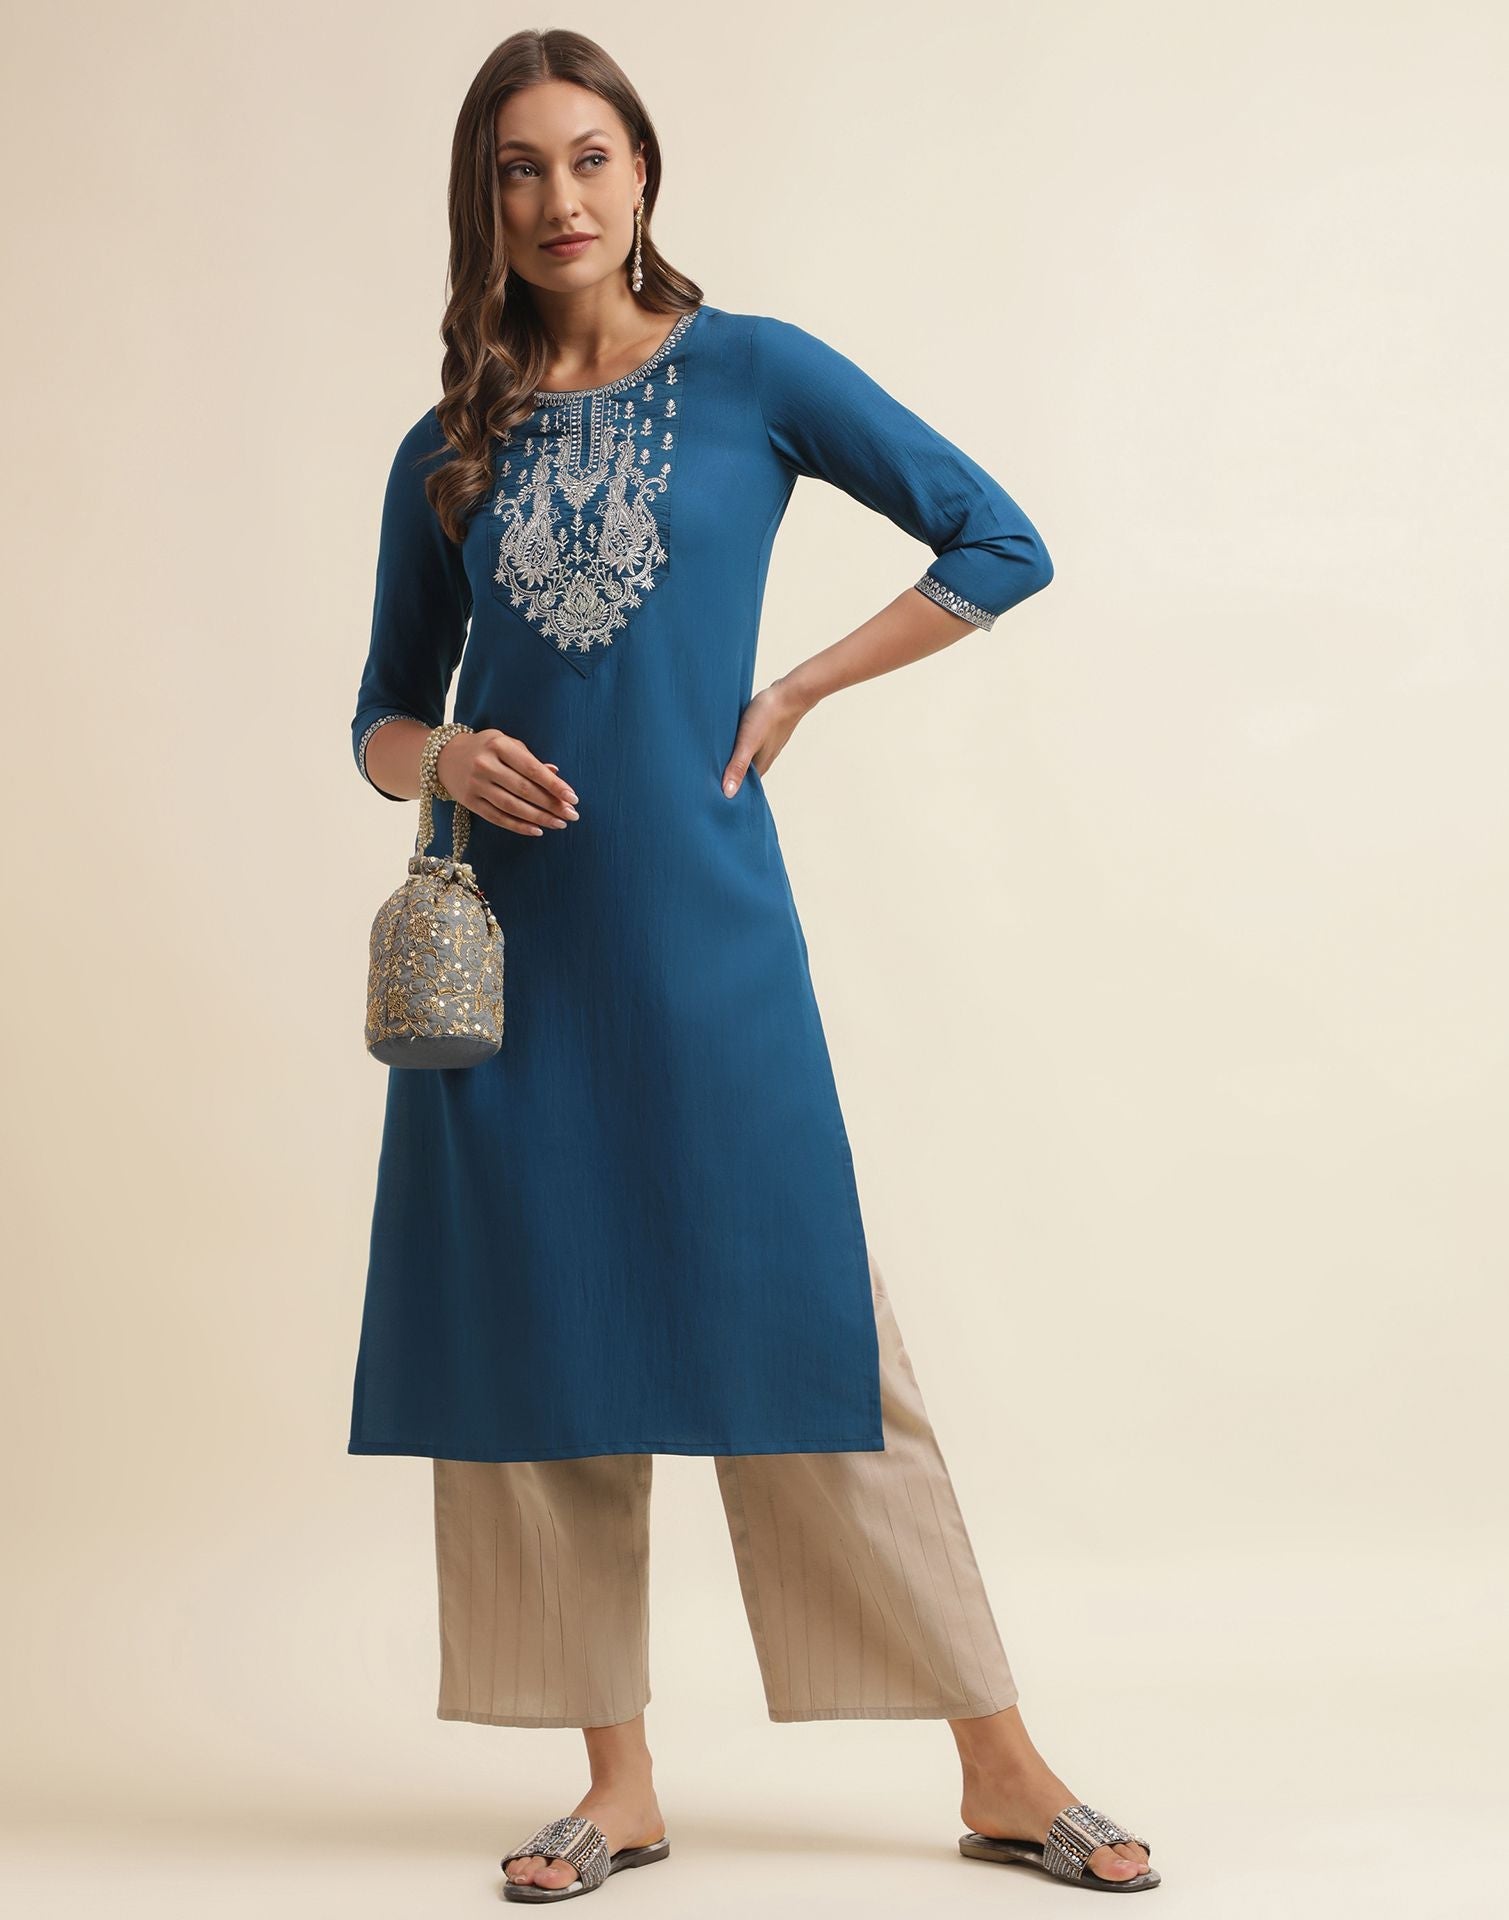 Which are the best websites to buy women semi winter kurti online in India?  - Quora